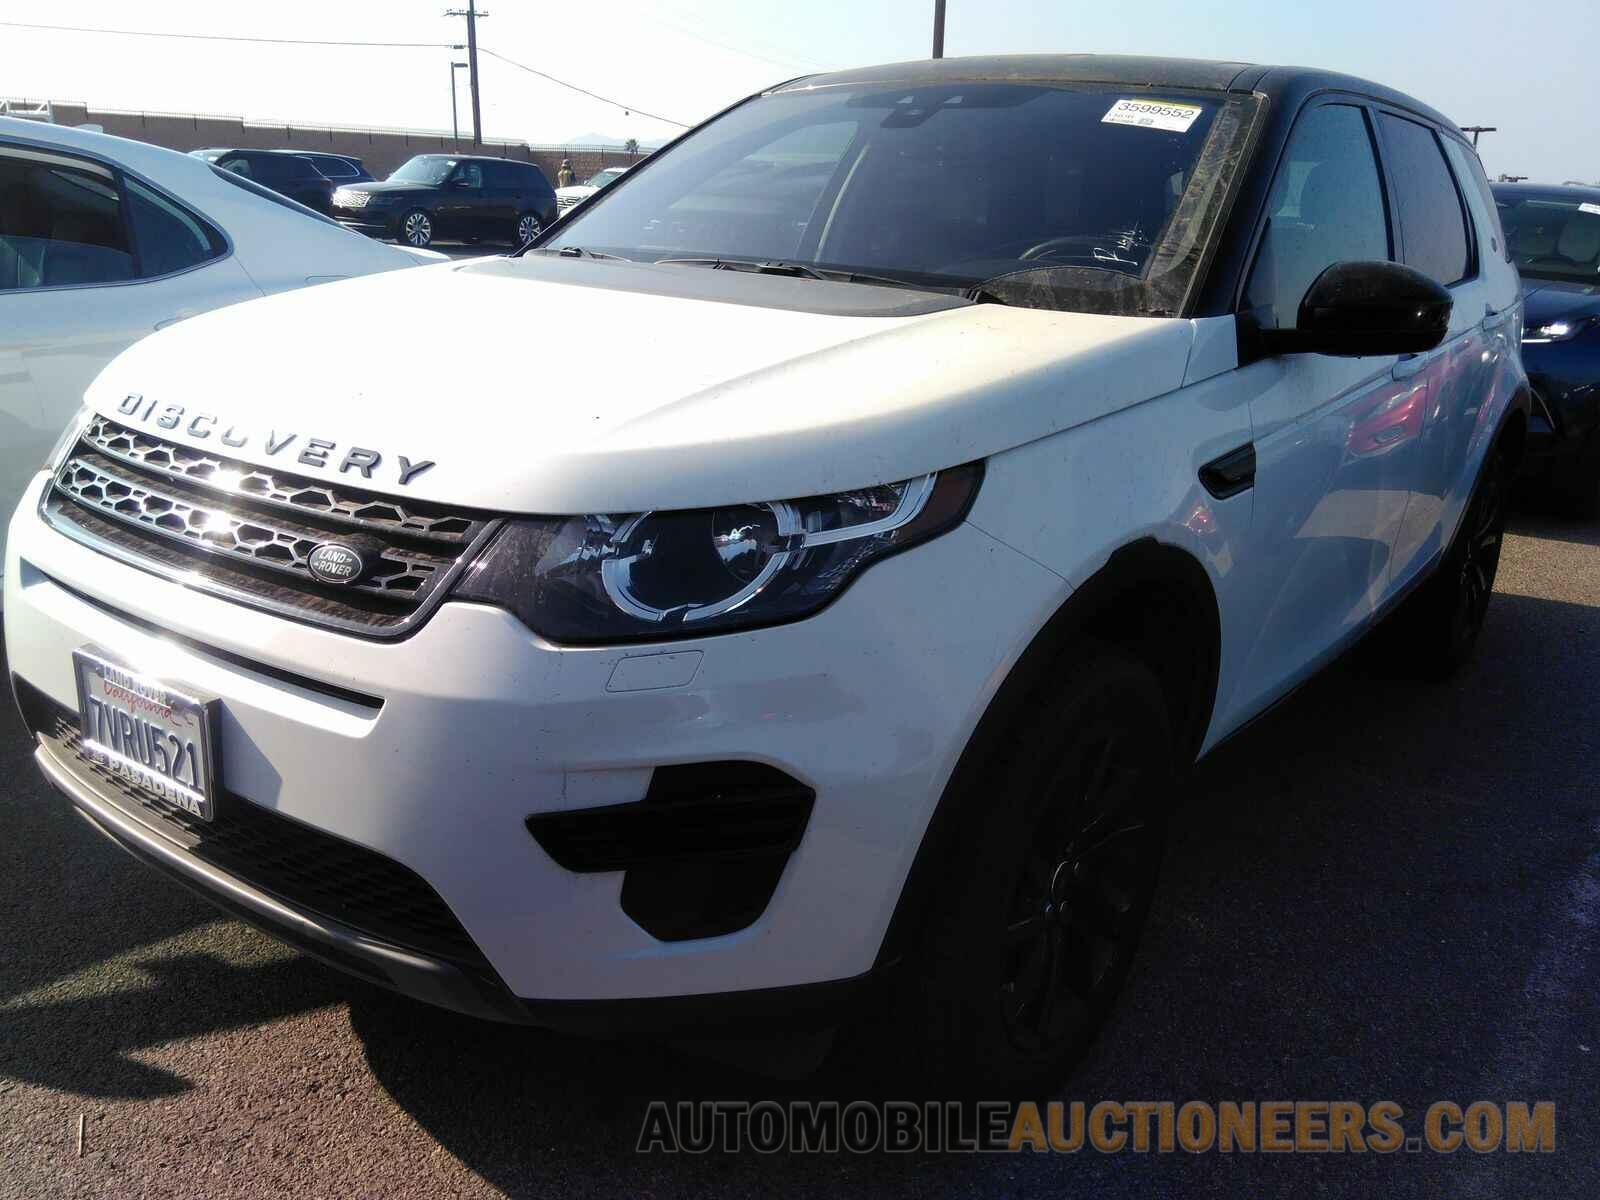 SALCP2BG6HH644235 Land Rover Discovery Sport 2017